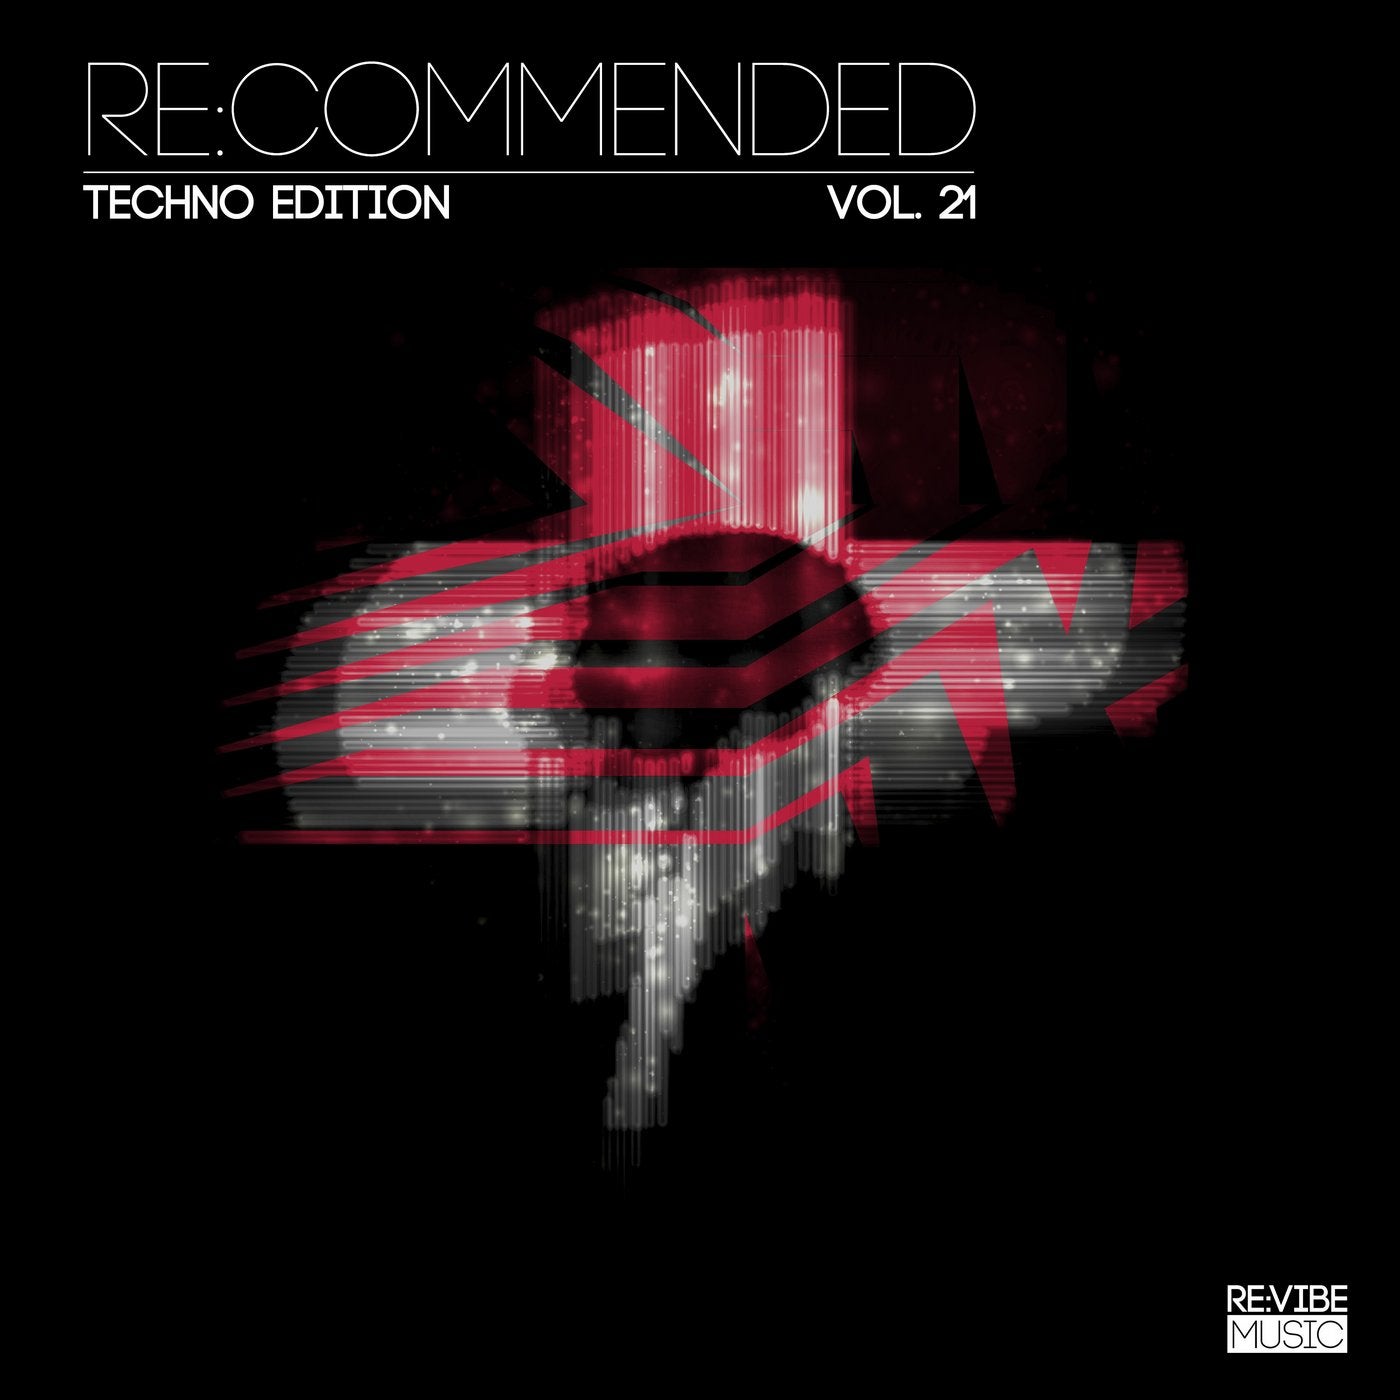 Re:Commended: Techno Edition, Vol. 21